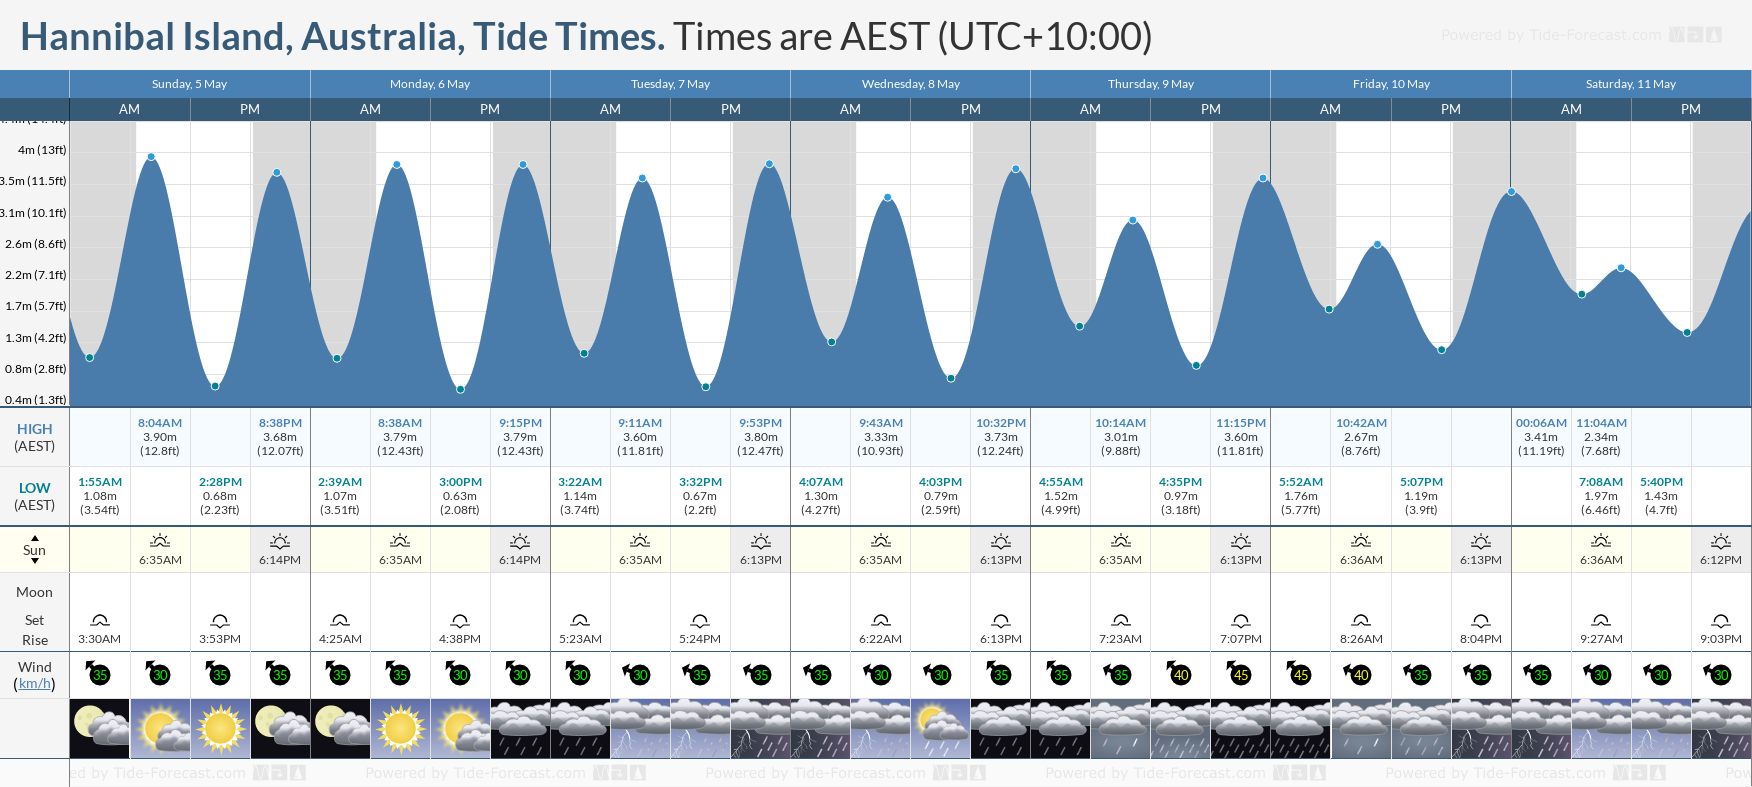 Hannibal Island, Australia Tide Chart including high and low tide tide times for the next 7 days